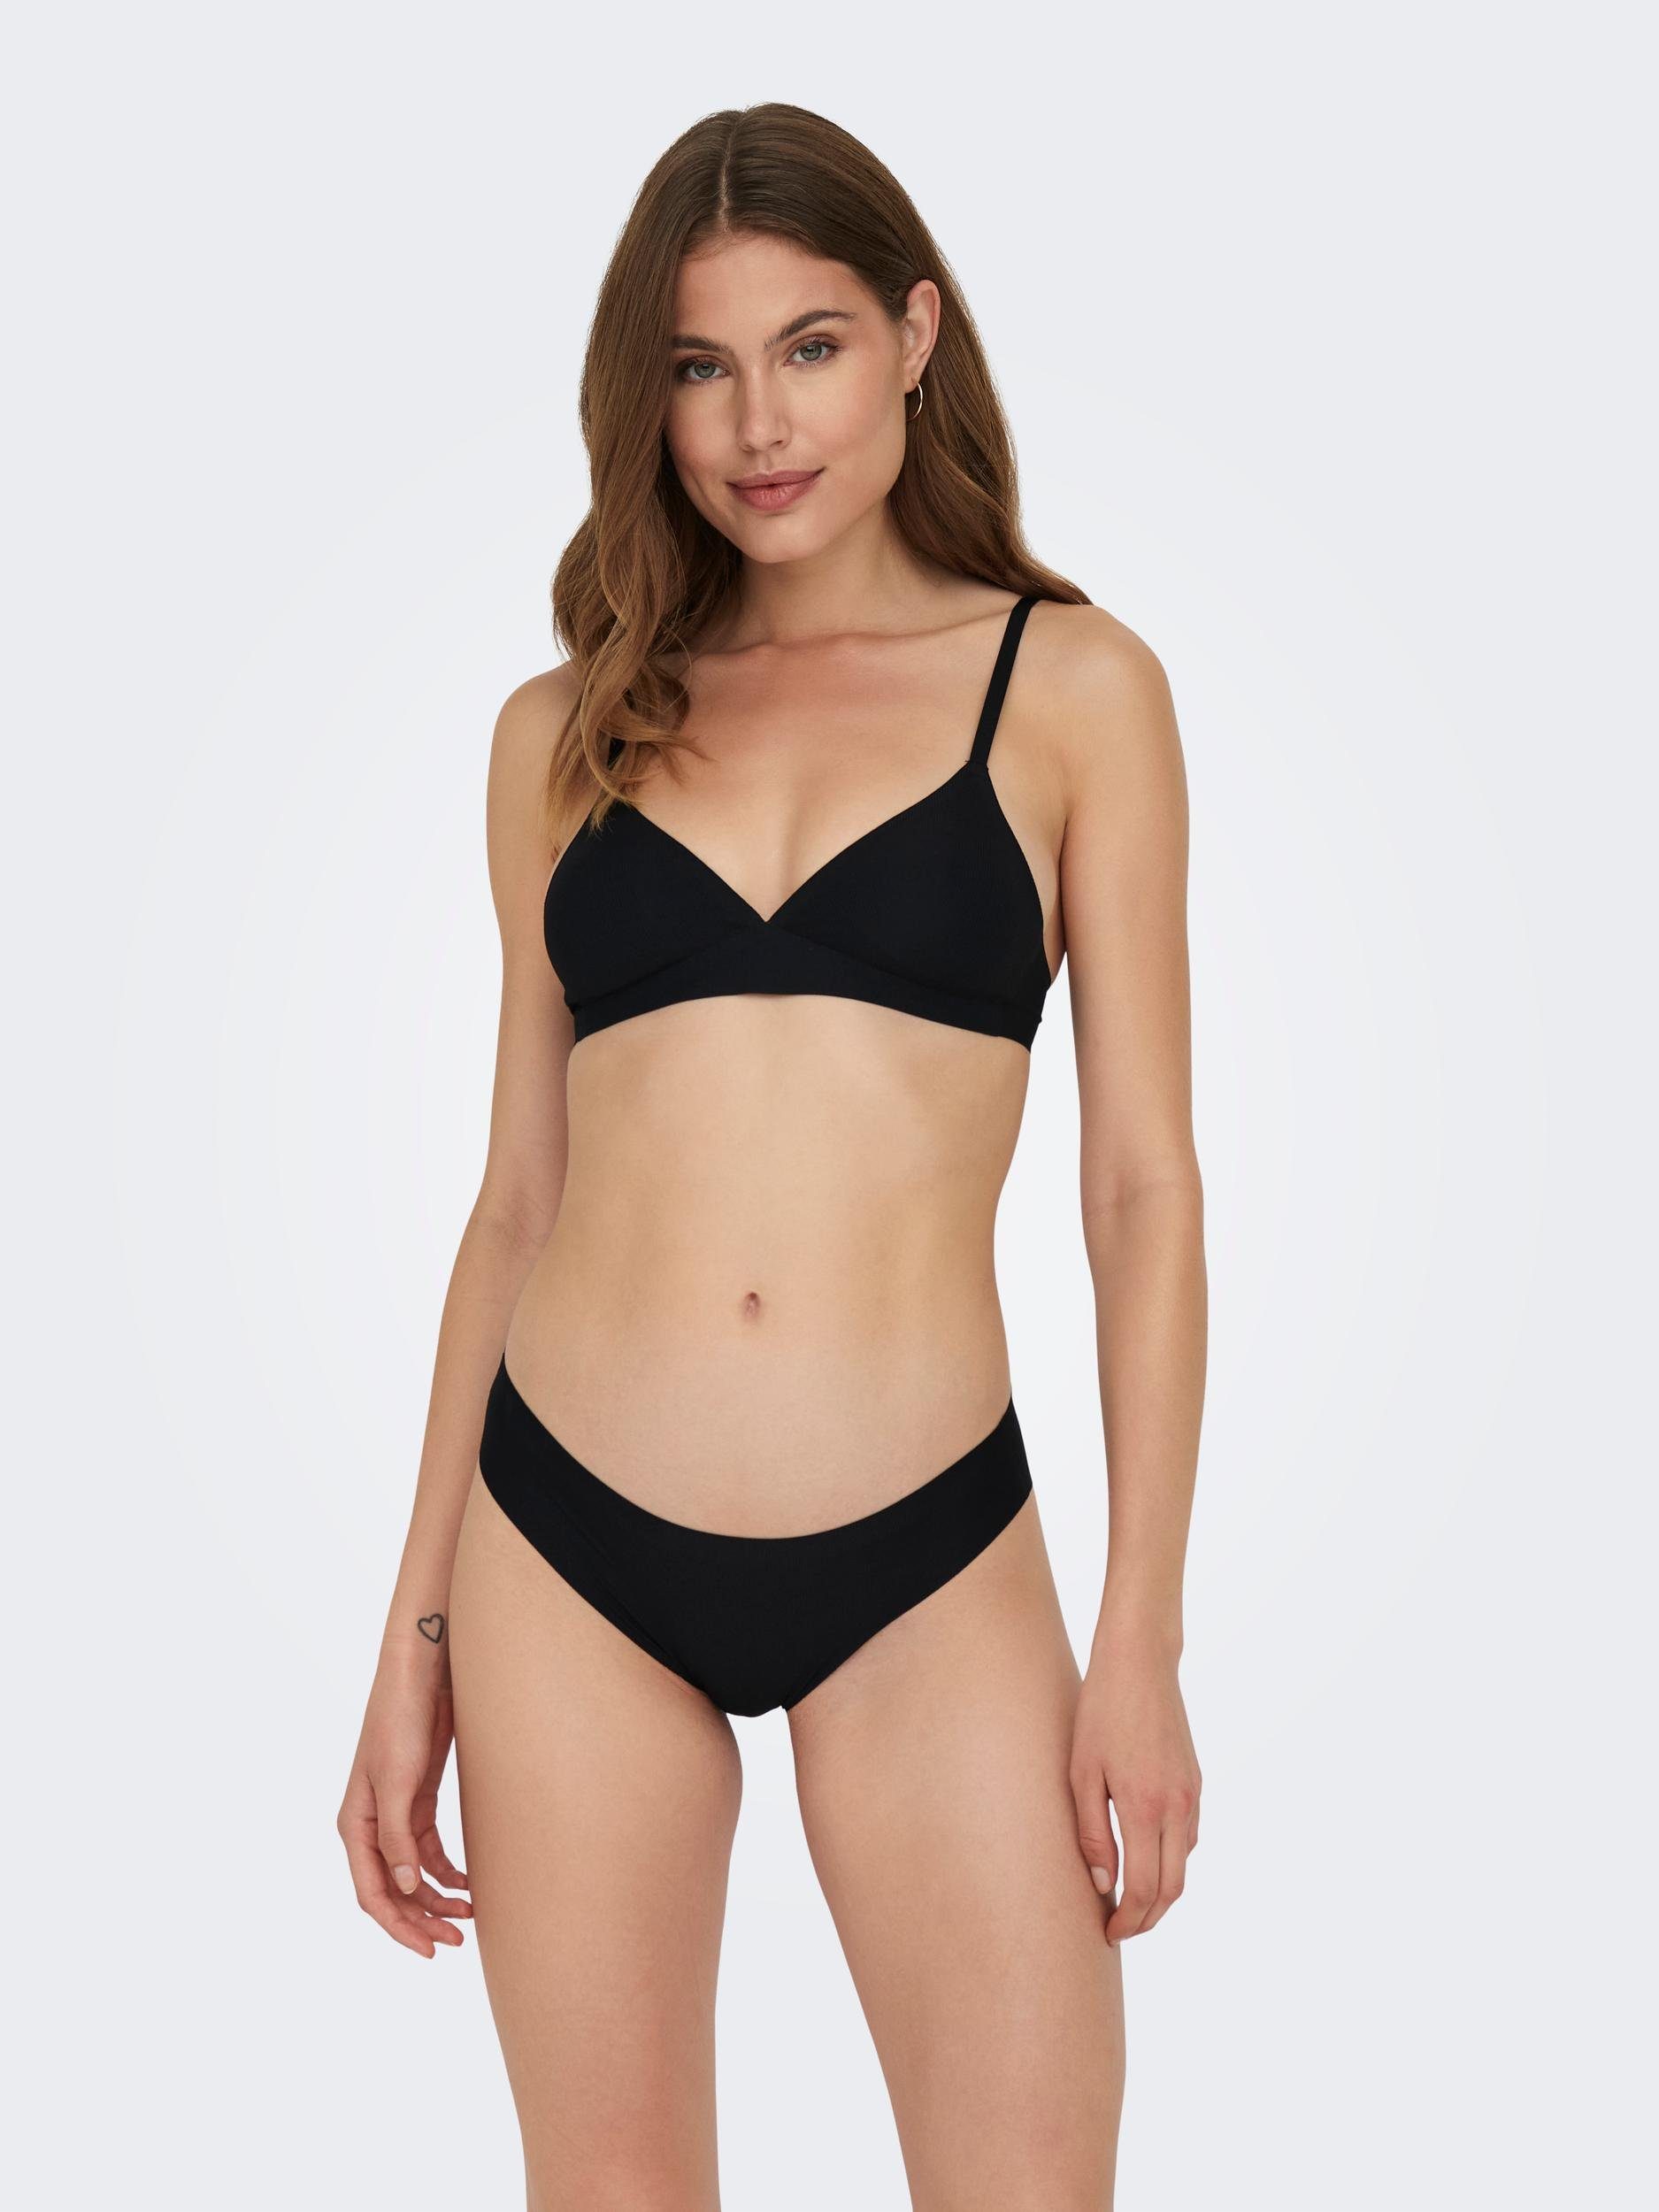 BRIEF 3-St) Slip 3-PACK (Set, INVISIBLE ONLY Black RIB ONLTRACY